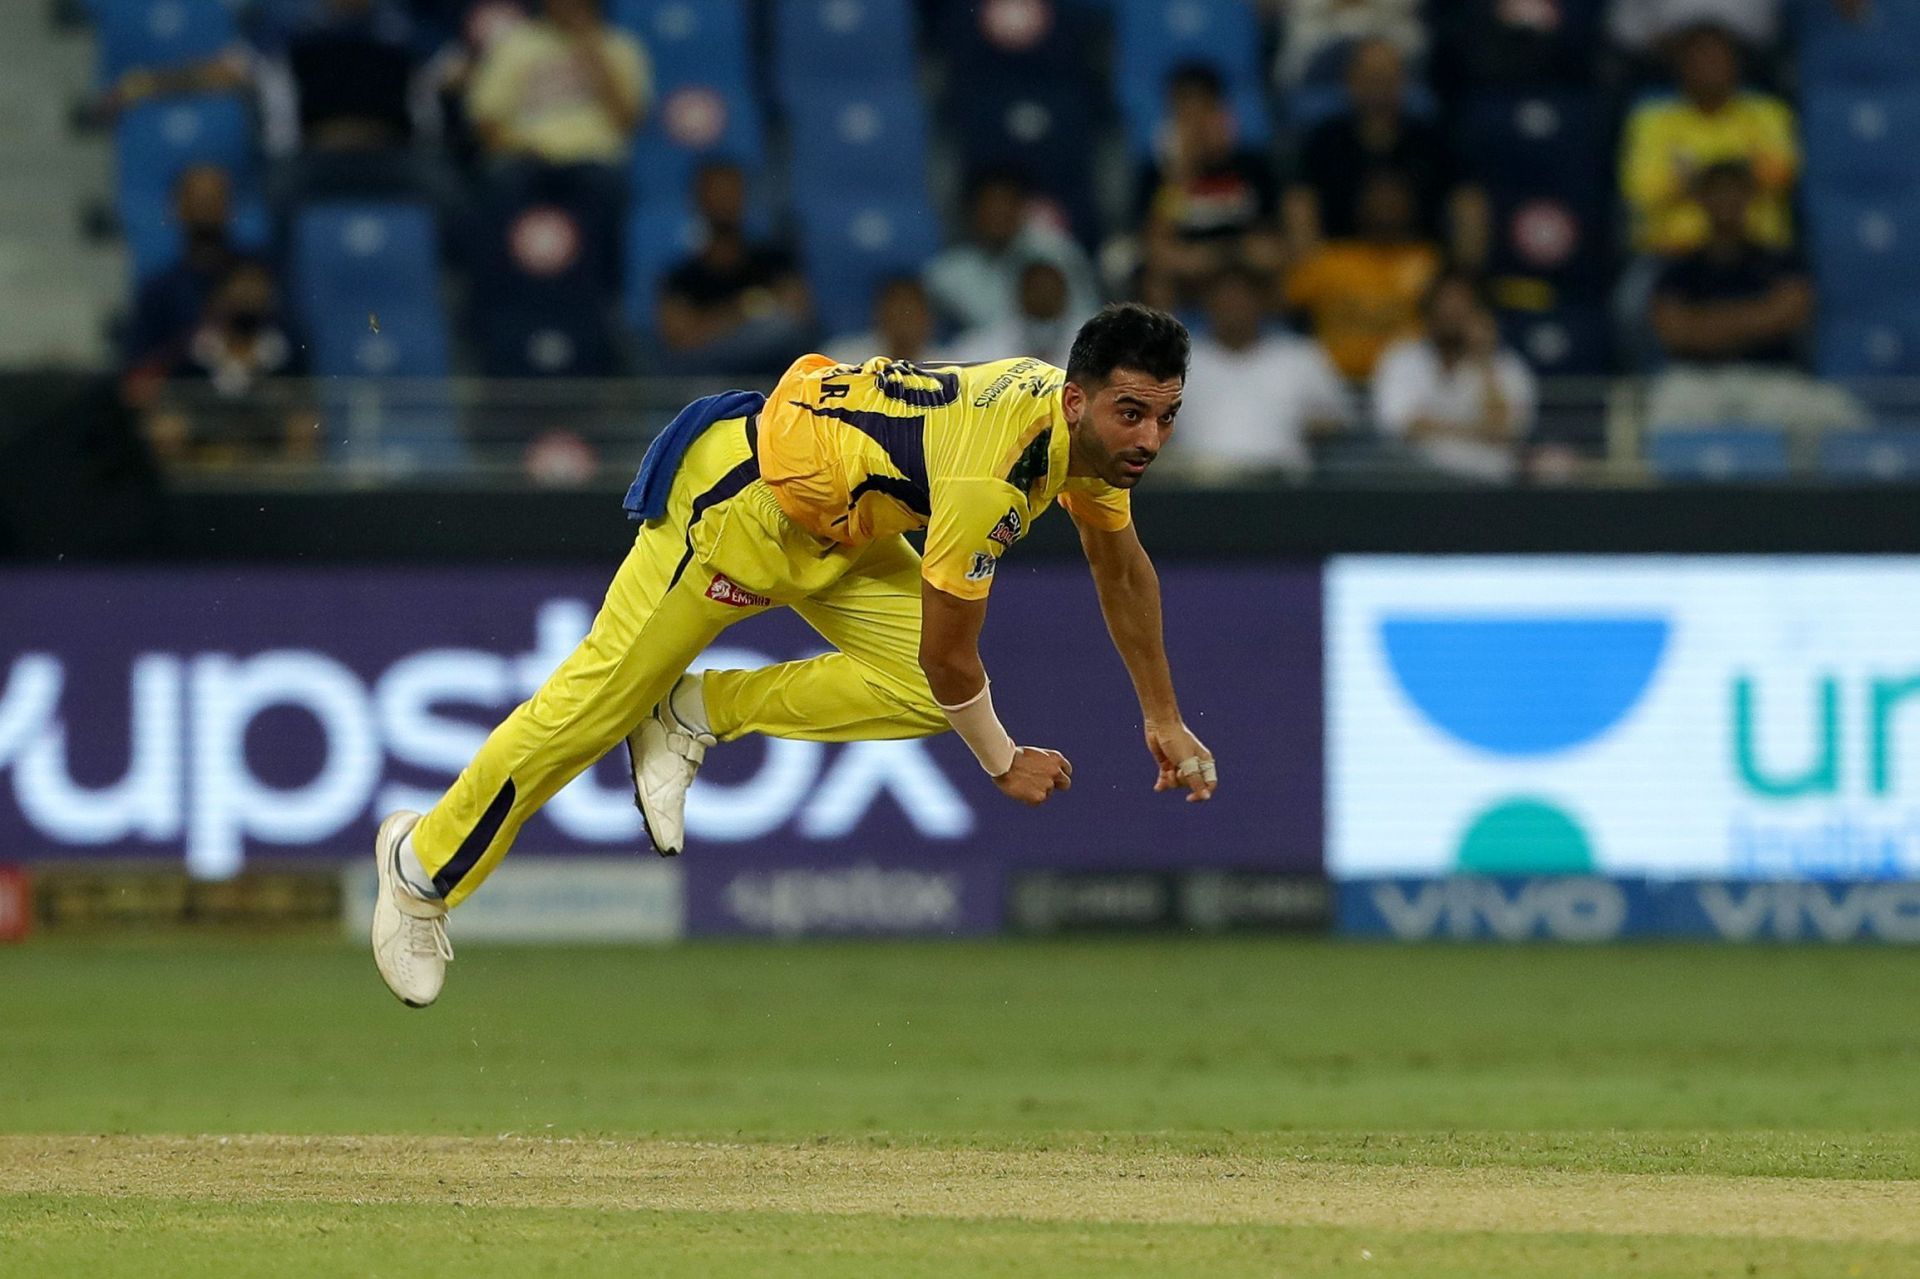 Deepak Chahar is likely to miss a major chunk, if not the entirety of IPL 2022 (Picture Credits: IPL).